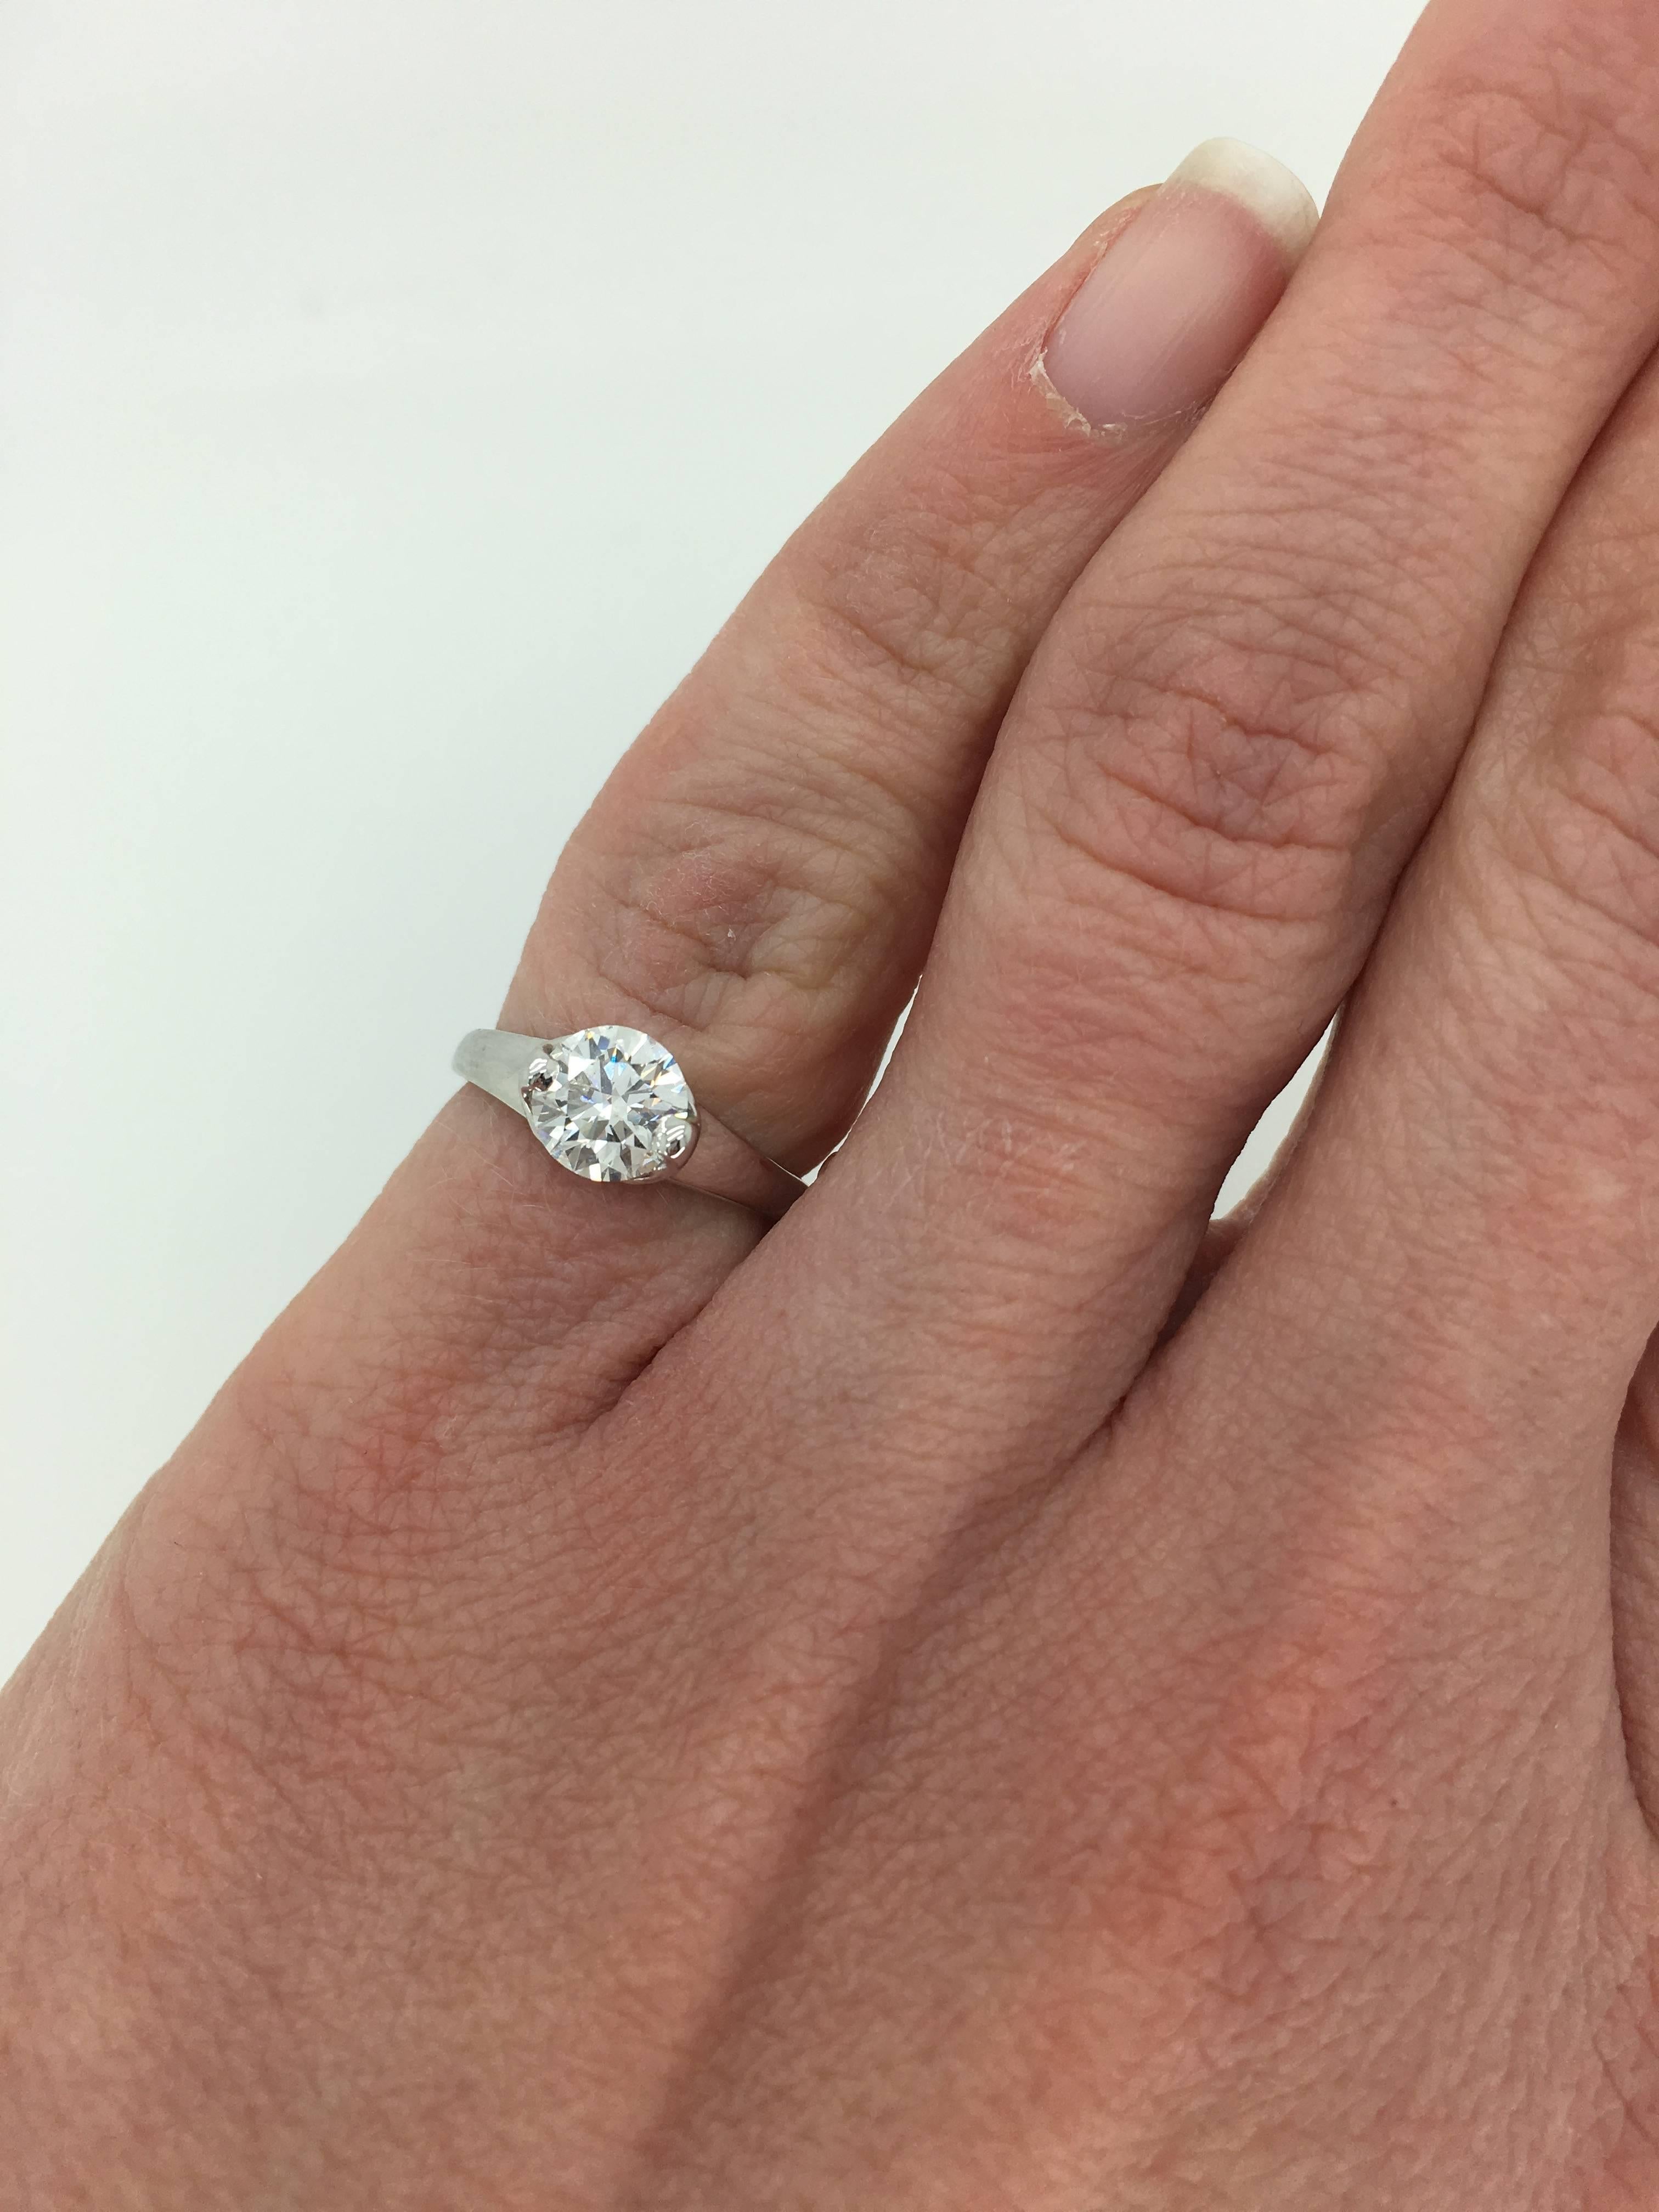 Unique Platinum solitaire engagement ring featuring a GIA Certified .78CT Round Brilliant Cut Diamond with F color and SI1 clarity. The ring is currently a size 3.5 and weighs 15.3 grams.